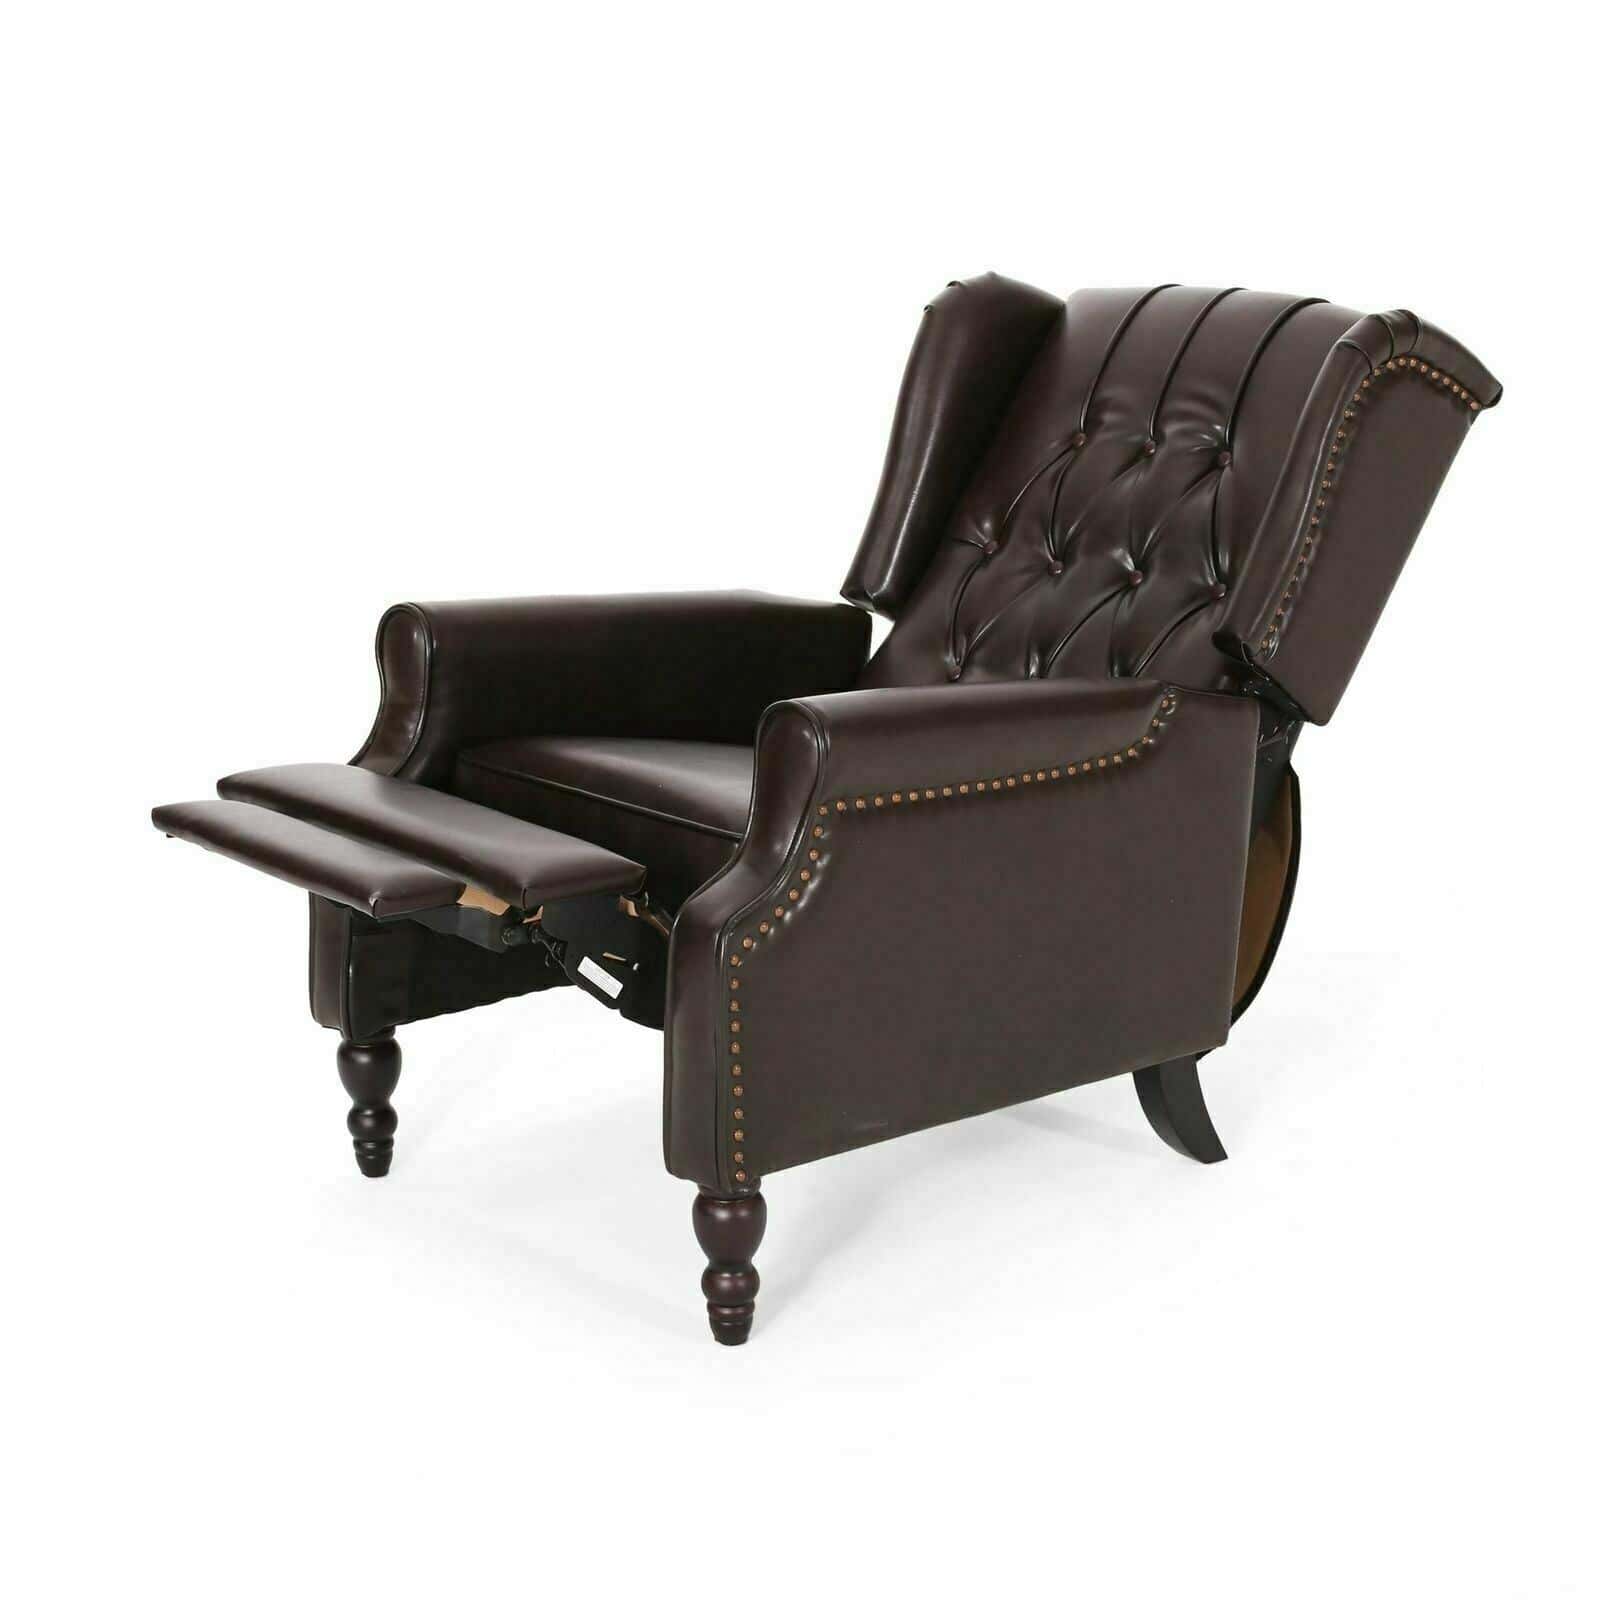 A brown leather recliner chair with nail head trim.